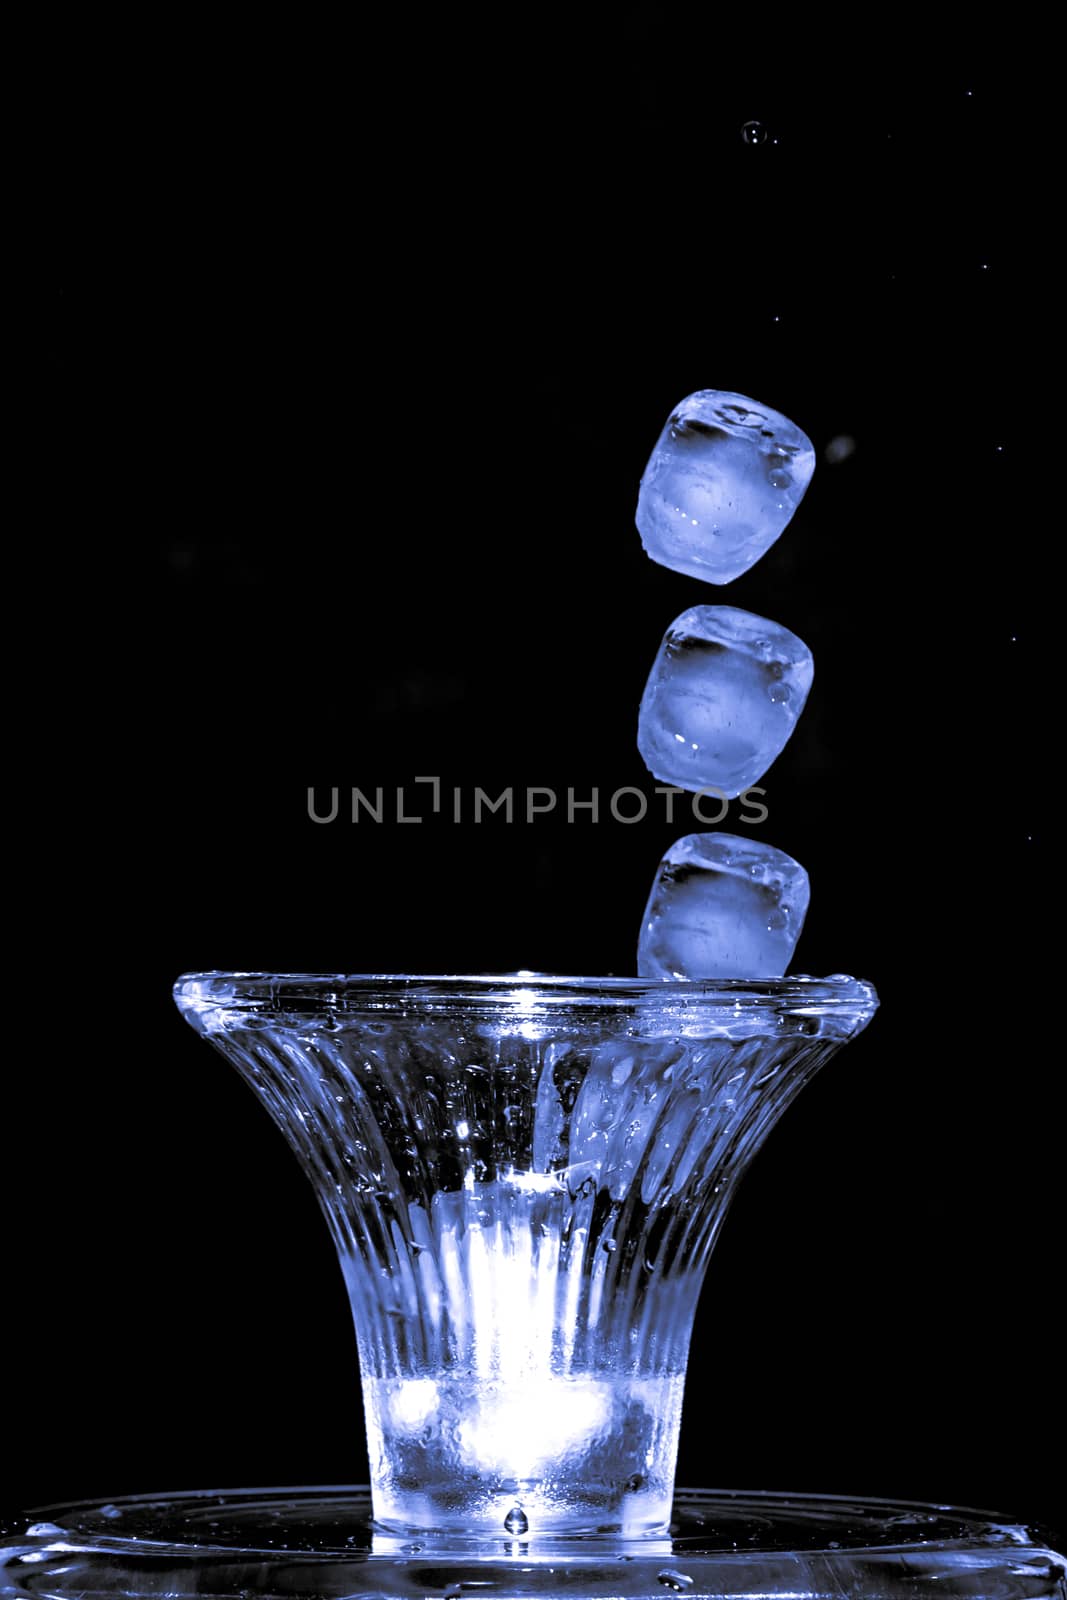 Stroboscopic effect created using flash capturing the motion ice as it splashes into a glass